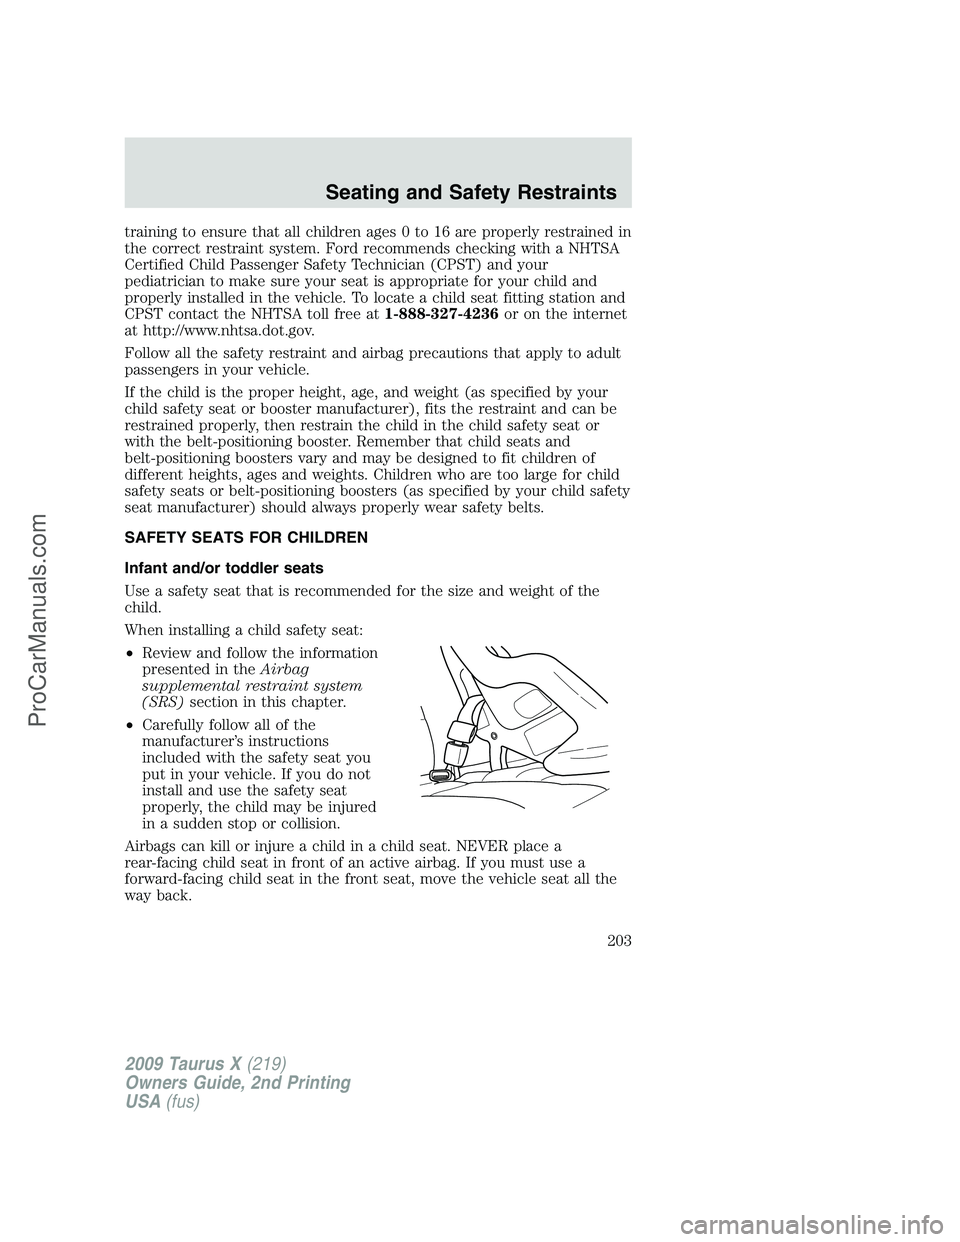 FORD FREESTYLE 2009  Owners Manual training to ensure that all children ages 0 to 16 are properly restrained in
the correct restraint system. Ford recommends checking with a NHTSA
Certified Child Passenger Safety Technician (CPST) and 